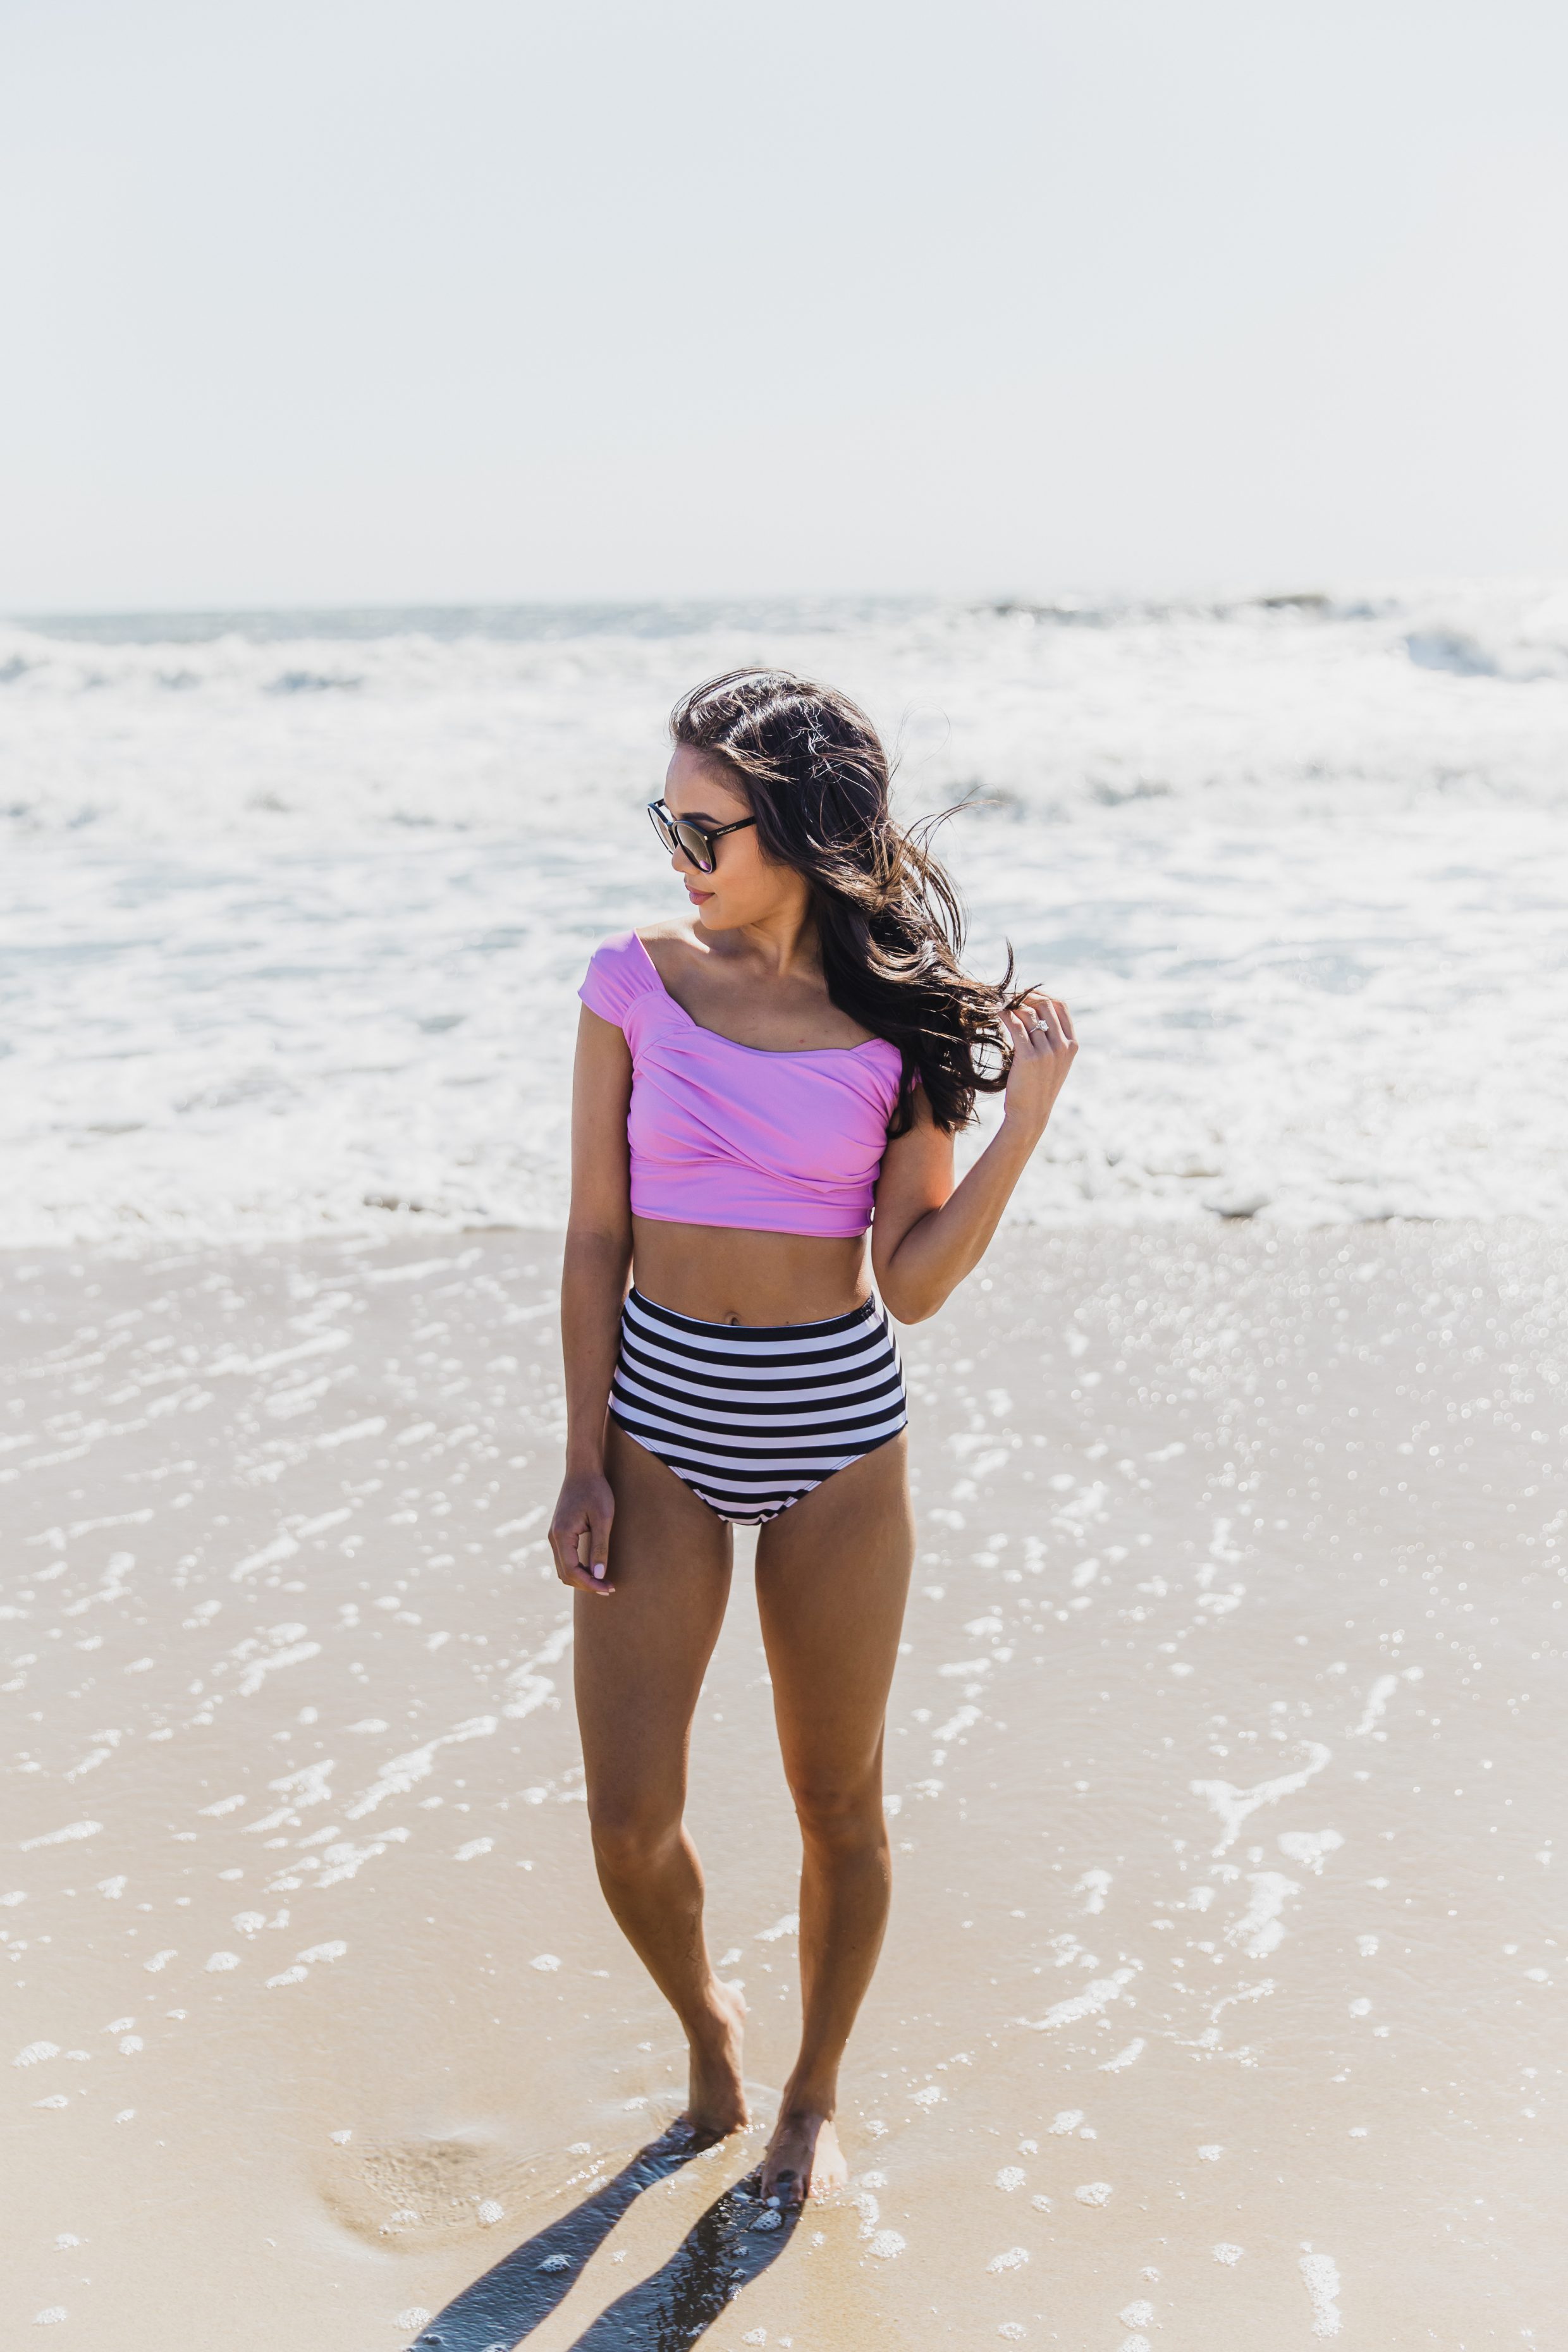 COLOR & CHIC | Orchid Swim Top + Striped High-Waisted Bottoms